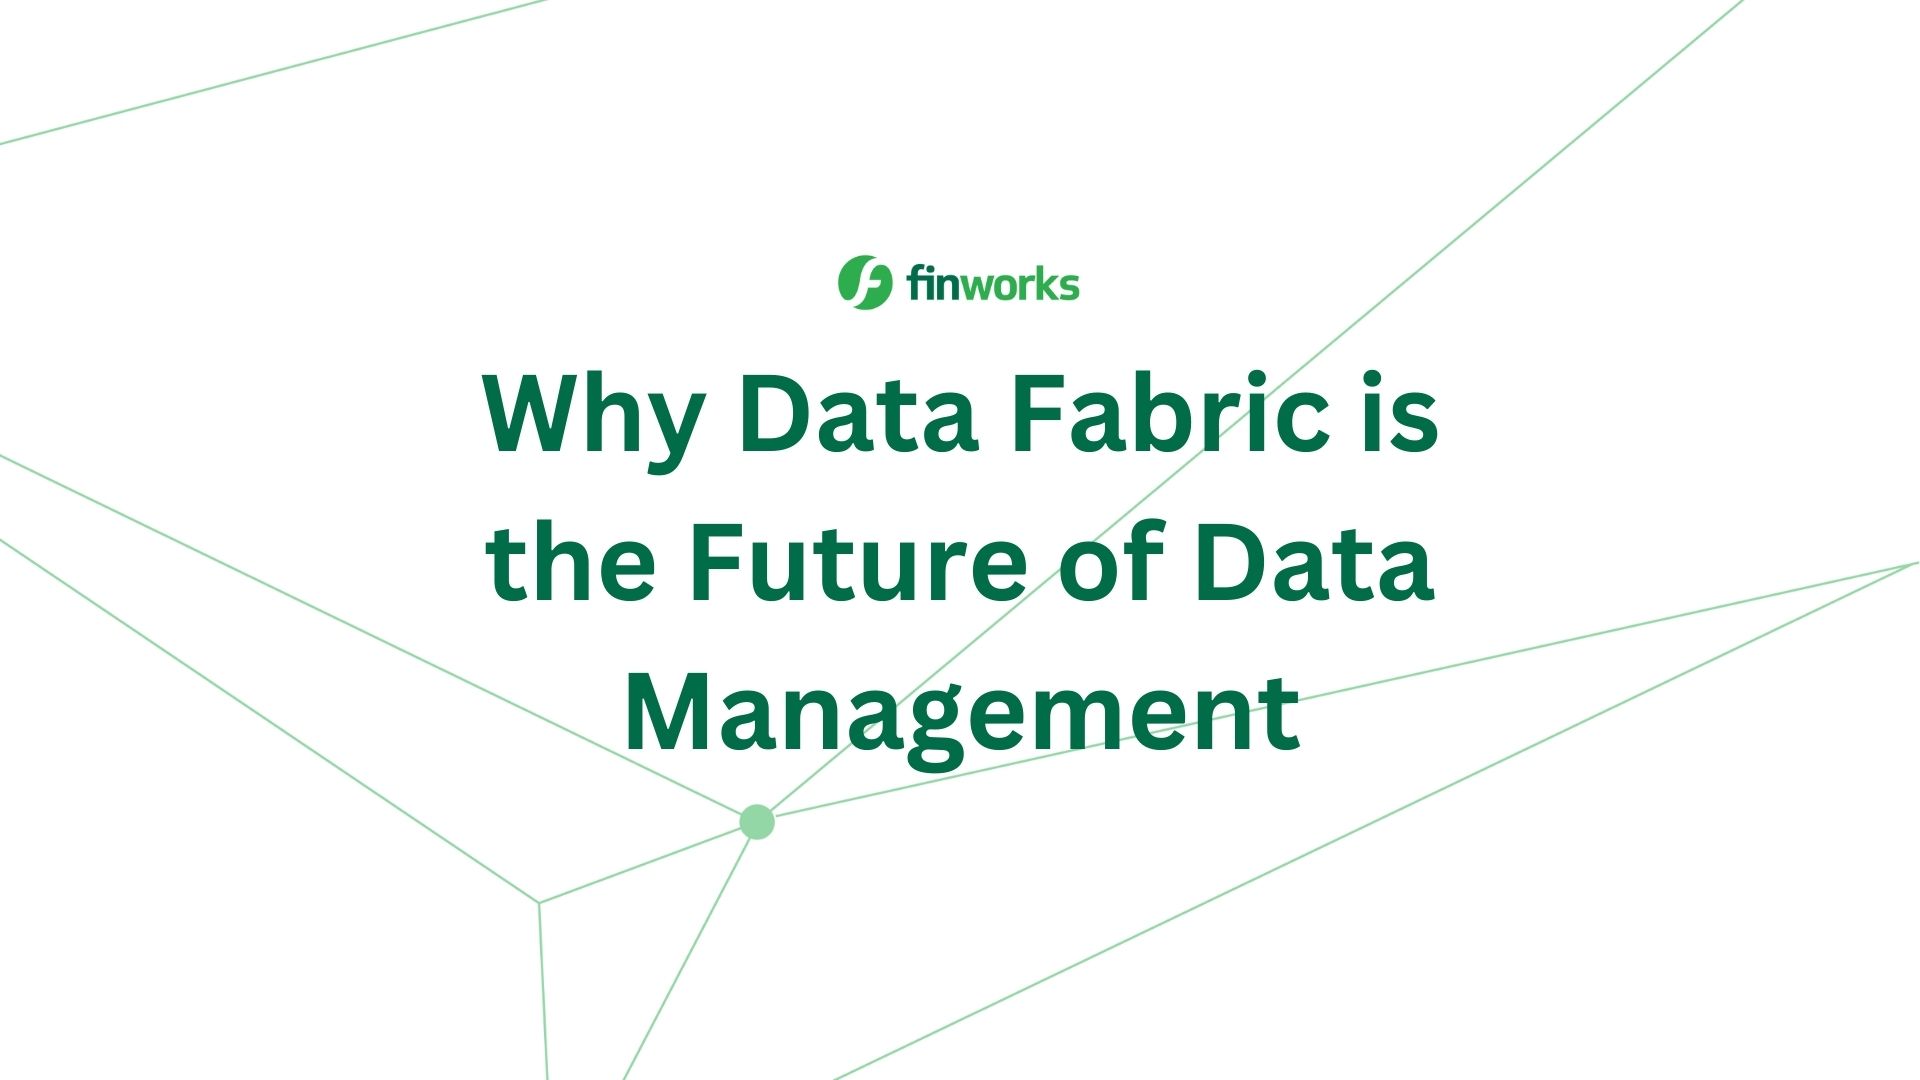 Why Data Fabric is the Future of Data Management